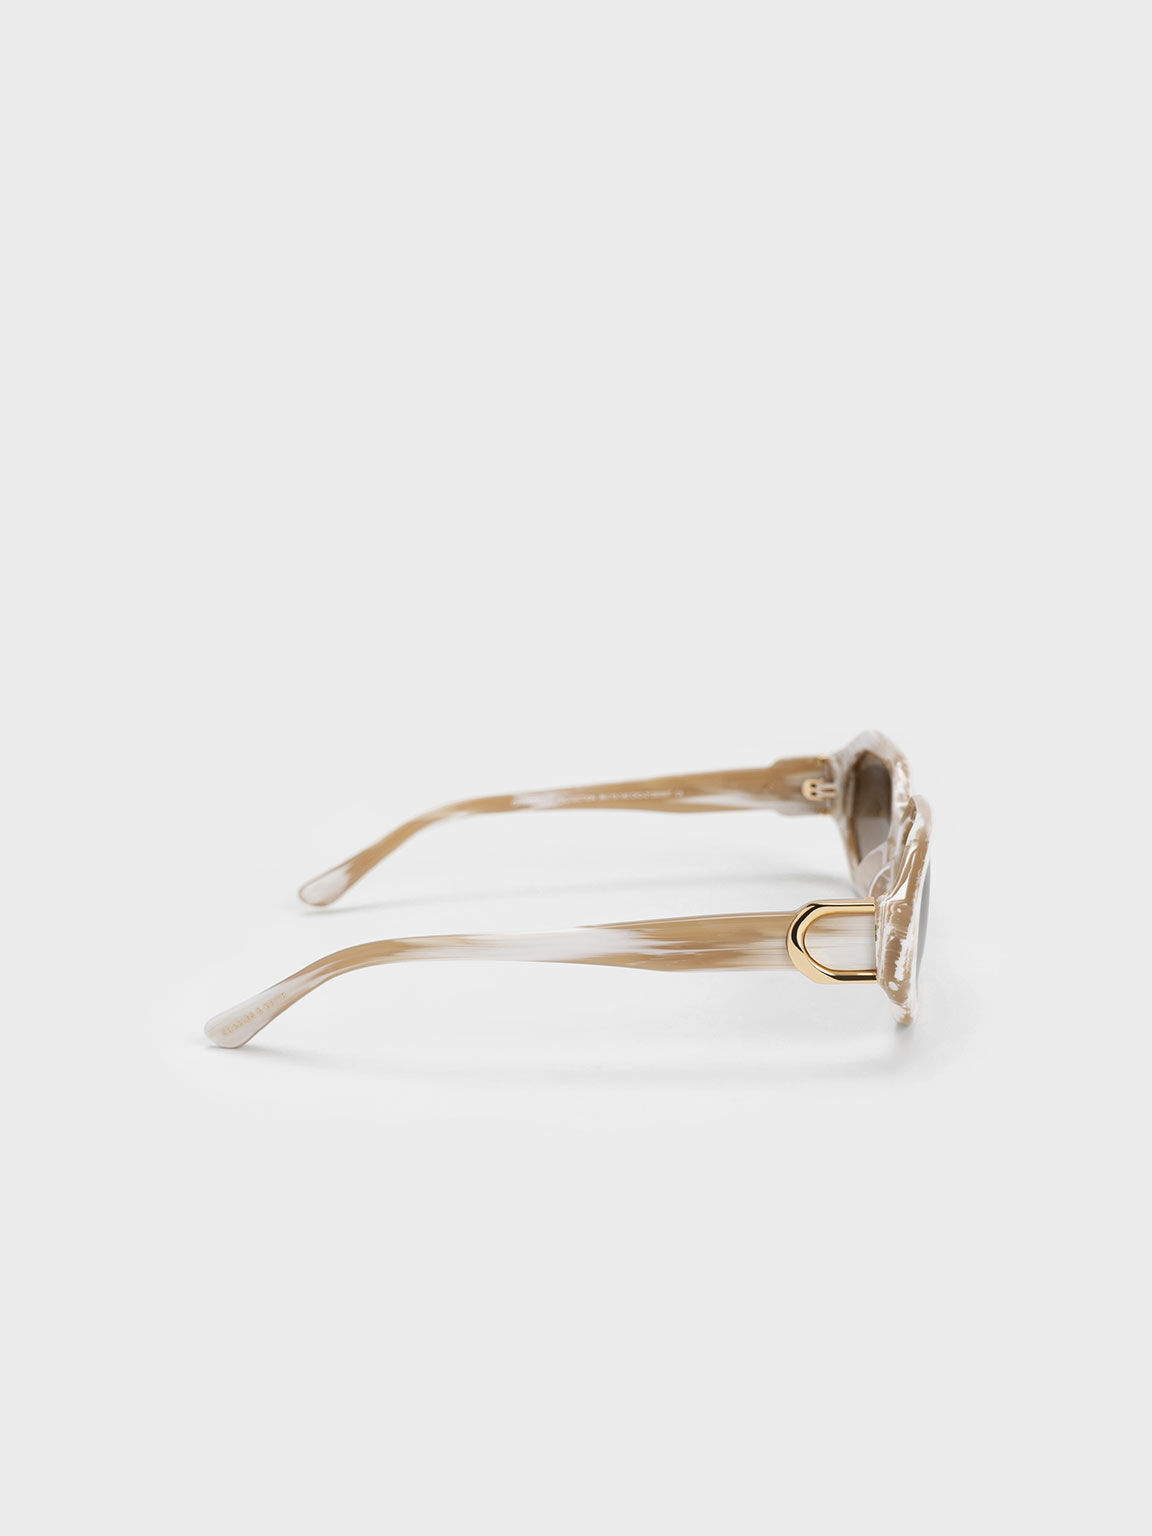 Gold Braided Wire-Frame Cateye Sunglasses - CHARLES & KEITH US